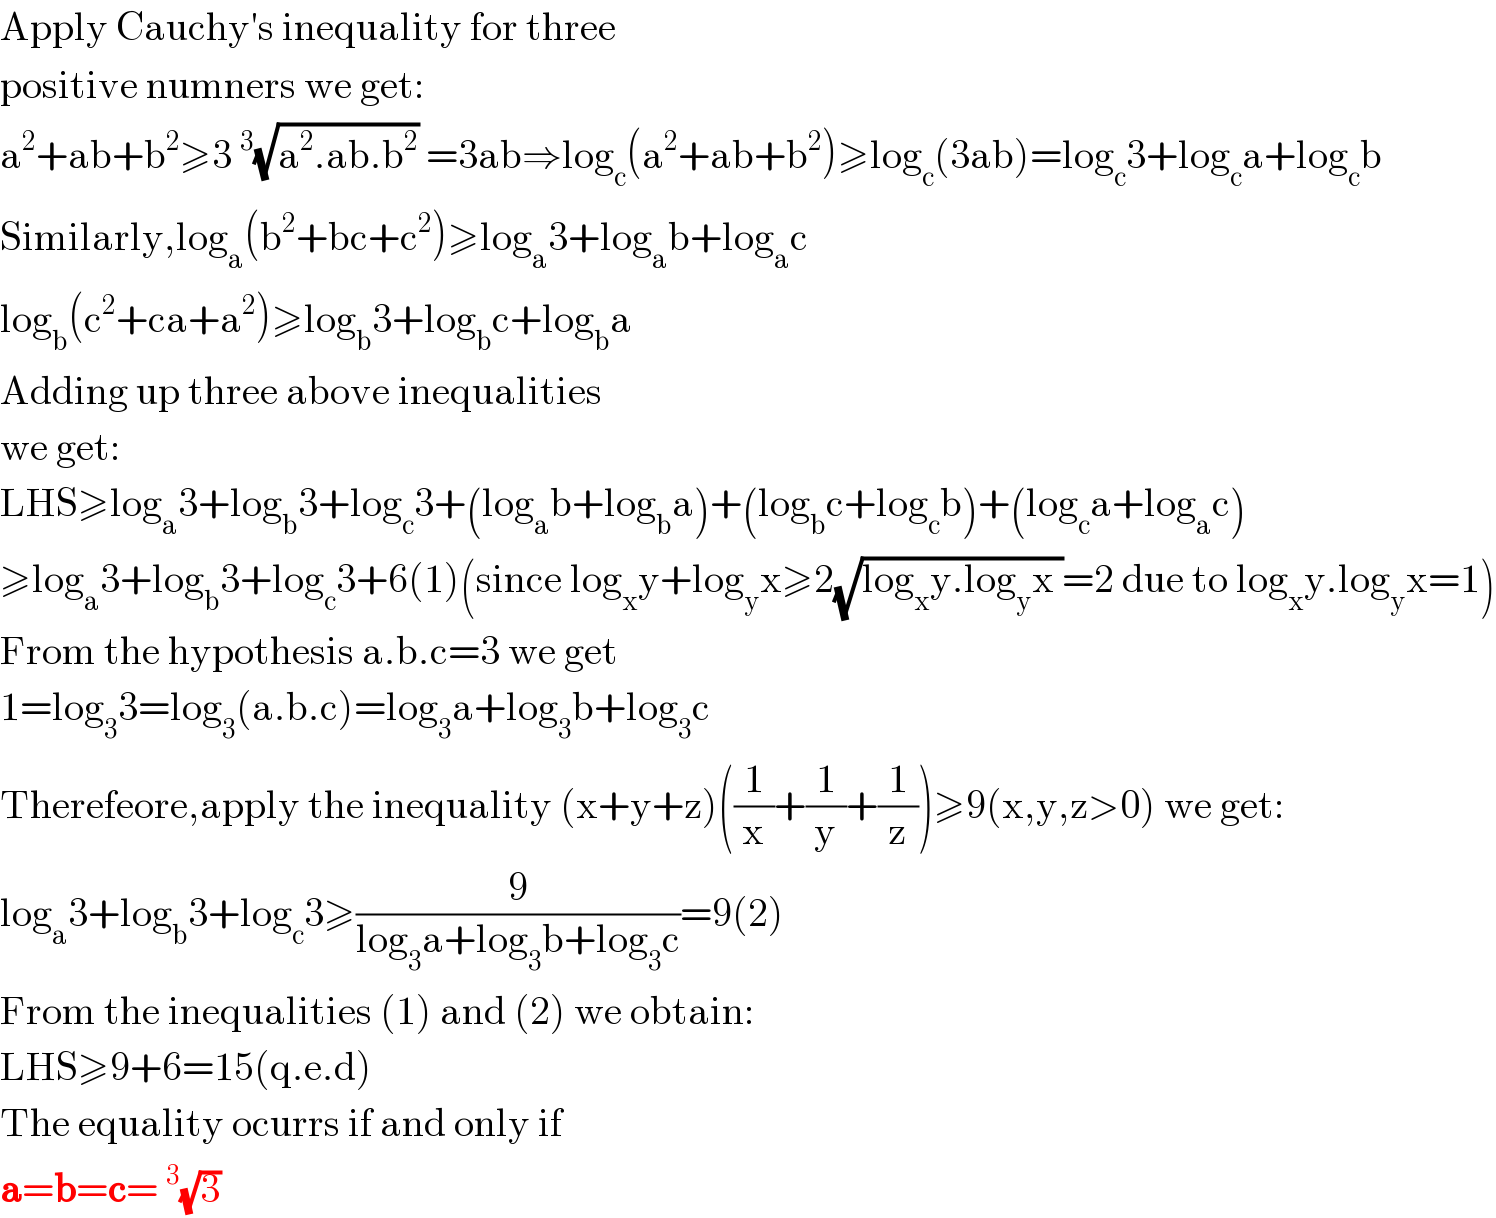 Apply Cauchy′s inequality for three  positive numners we get:  a^2 +ab+b^2 ≥3^3 (√(a^2 .ab.b^2 )) =3ab⇒log_c (a^2 +ab+b^2 )≥log_c (3ab)=log_c 3+log_c a+log_c b  Similarly,log_a (b^2 +bc+c^2 )≥log_a 3+log_a b+log_a c  log_b (c^2 +ca+a^2 )≥log_b 3+log_b c+log_b a  Adding up three above inequalities  we get:  LHS≥log_a 3+log_b 3+log_c 3+(log_a b+log_b a)+(log_b c+log_c b)+(log_c a+log_a c)  ≥log_a 3+log_b 3+log_c 3+6(1)(since log_x y+log_y x≥2(√(log_x y.log_y x ))=2 due to log_x y.log_y x=1)  From the hypothesis a.b.c=3 we get  1=log_3 3=log_3 (a.b.c)=log_3 a+log_3 b+log_3 c  Therefeore,apply the inequality (x+y+z)((1/x)+(1/y)+(1/z))≥9(x,y,z>0) we get:  log_a 3+log_b 3+log_c 3≥(9/(log_3 a+log_3 b+log_3 c))=9(2)  From the inequalities (1) and (2) we obtain:  LHS≥9+6=15(q.e.d)  The equality ocurrs if and only if  a=b=c=^3 (√3)   